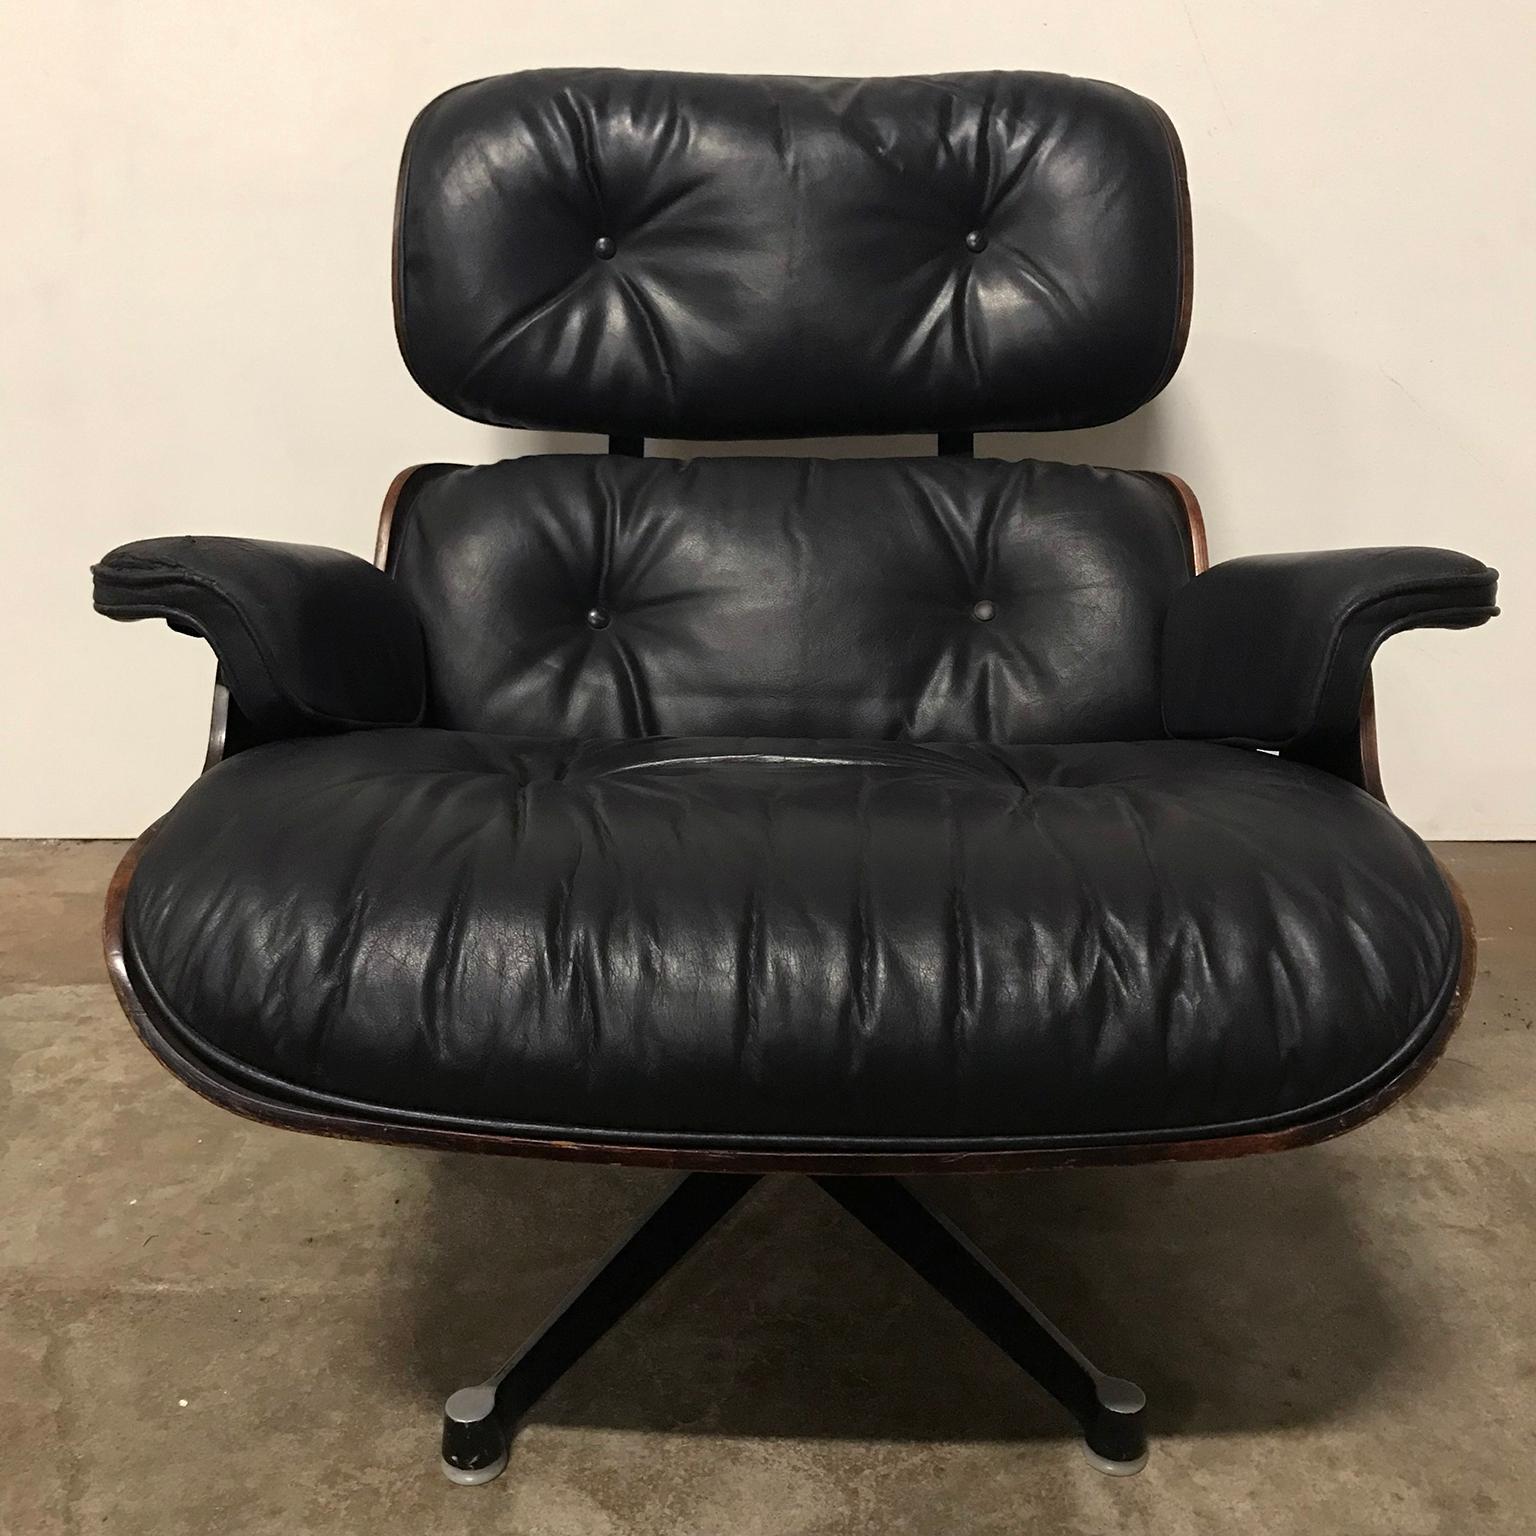 1956, Ray & Charles Eames Lounge Chair, Rare First Edition 1956 in Black Leather For Sale 2